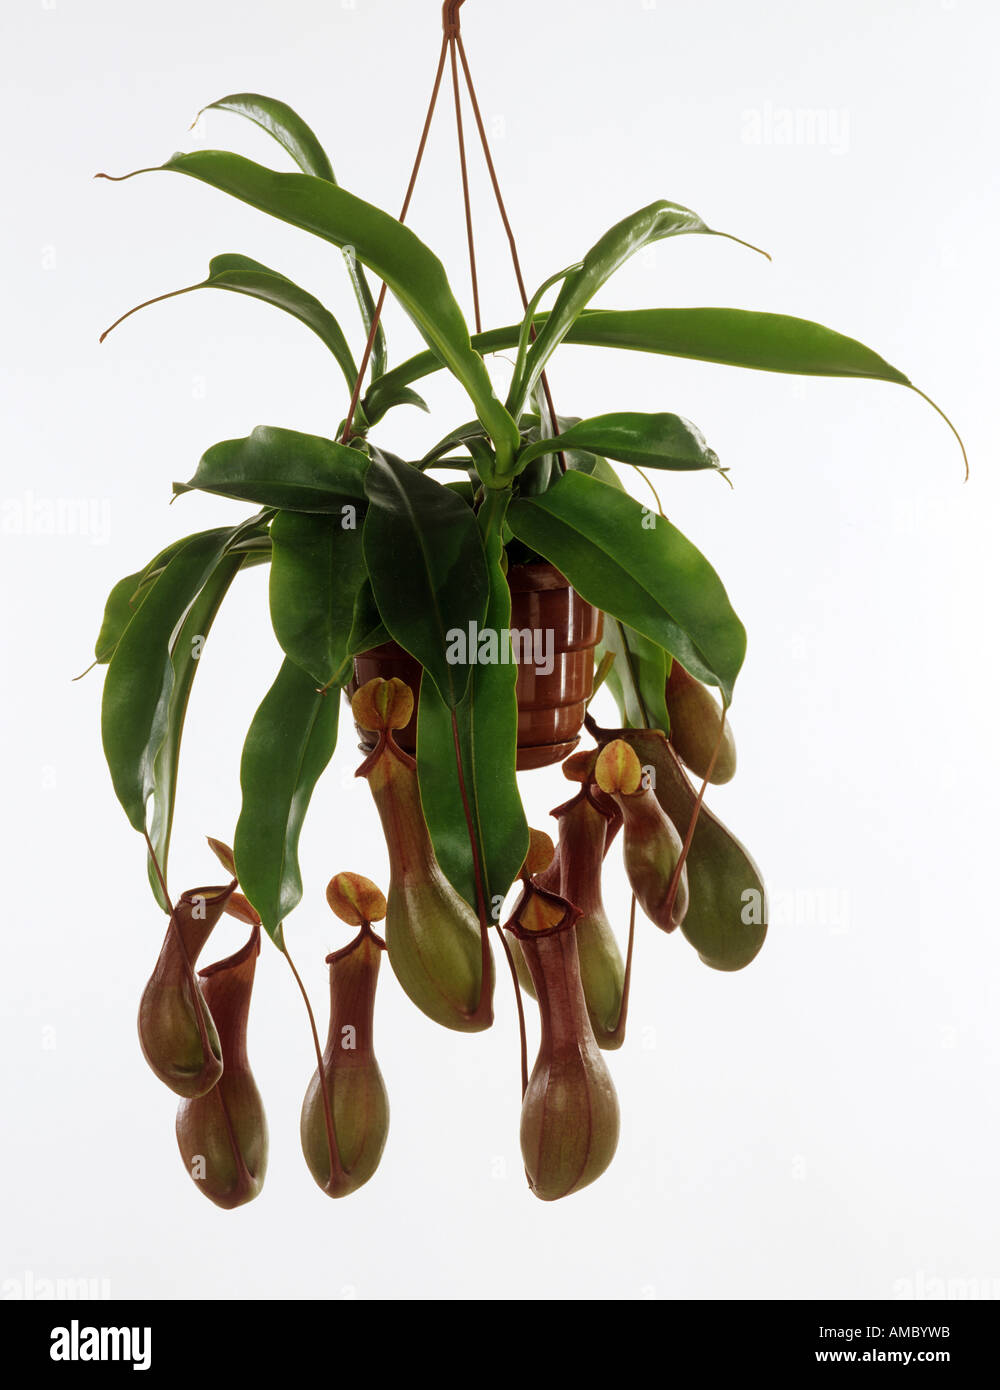 Pitcher plant / Nepenthes Stock Photo